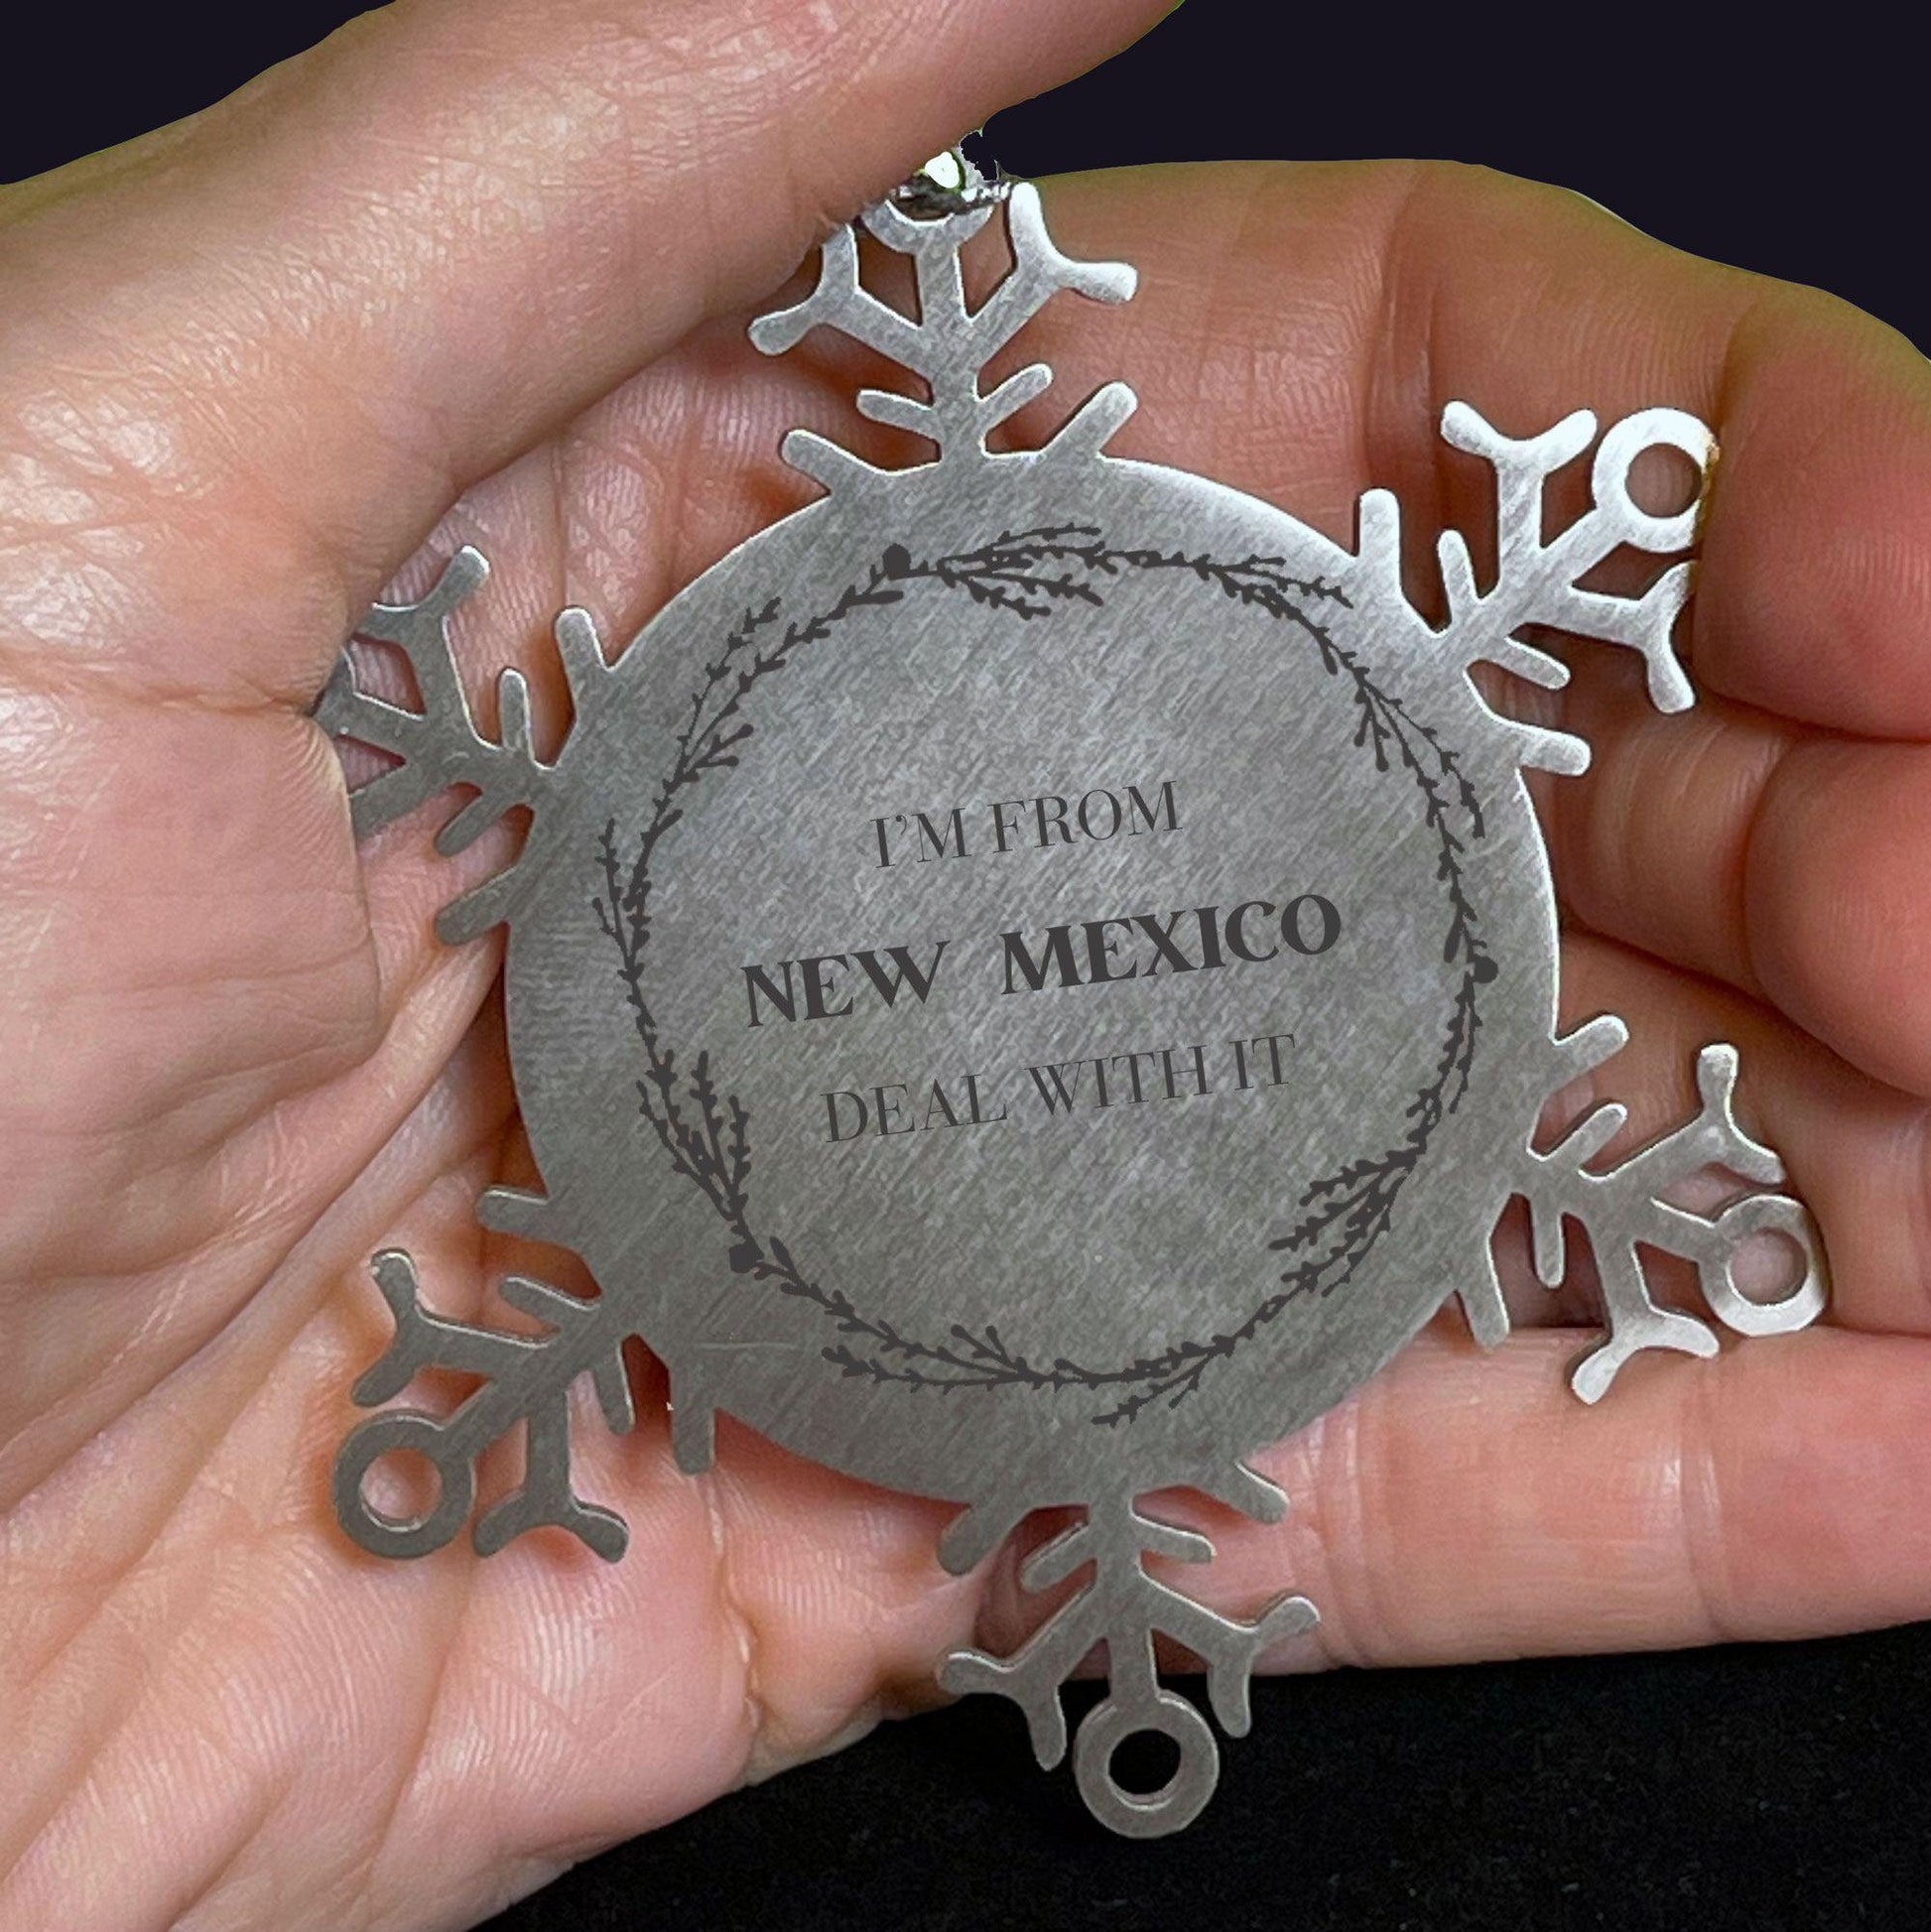 I'm from New Mexico, Deal with it, Proud New Mexico State Ornament Gifts, New Mexico Snowflake Ornament Gift Idea, Christmas Gifts for New Mexico People, Coworkers, Colleague - Mallard Moon Gift Shop